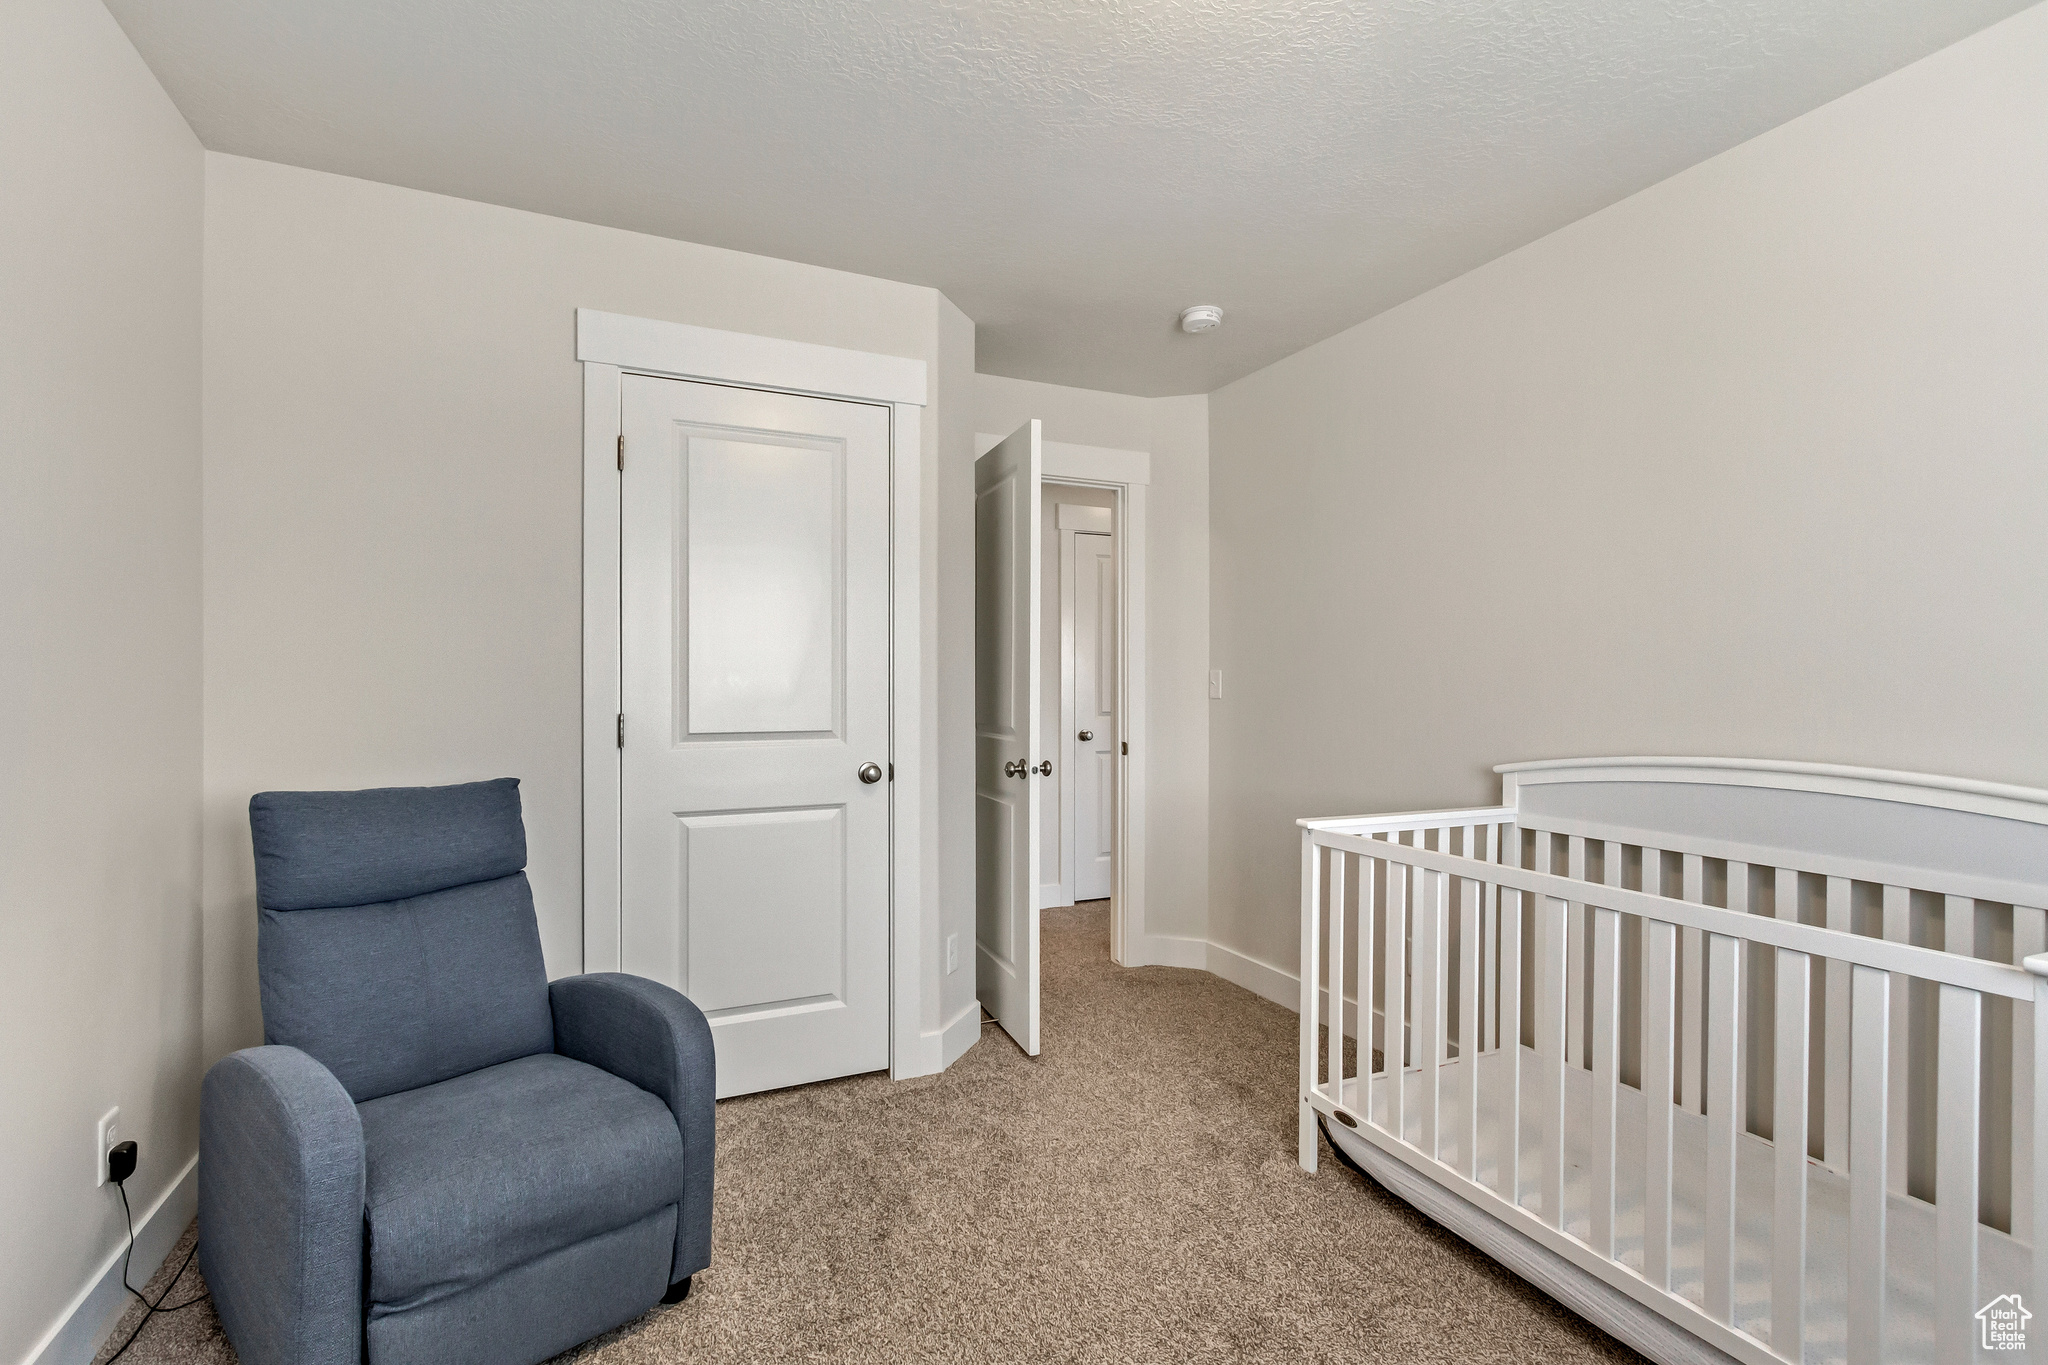 Bedroom with a crib, a closet, and light colored carpet